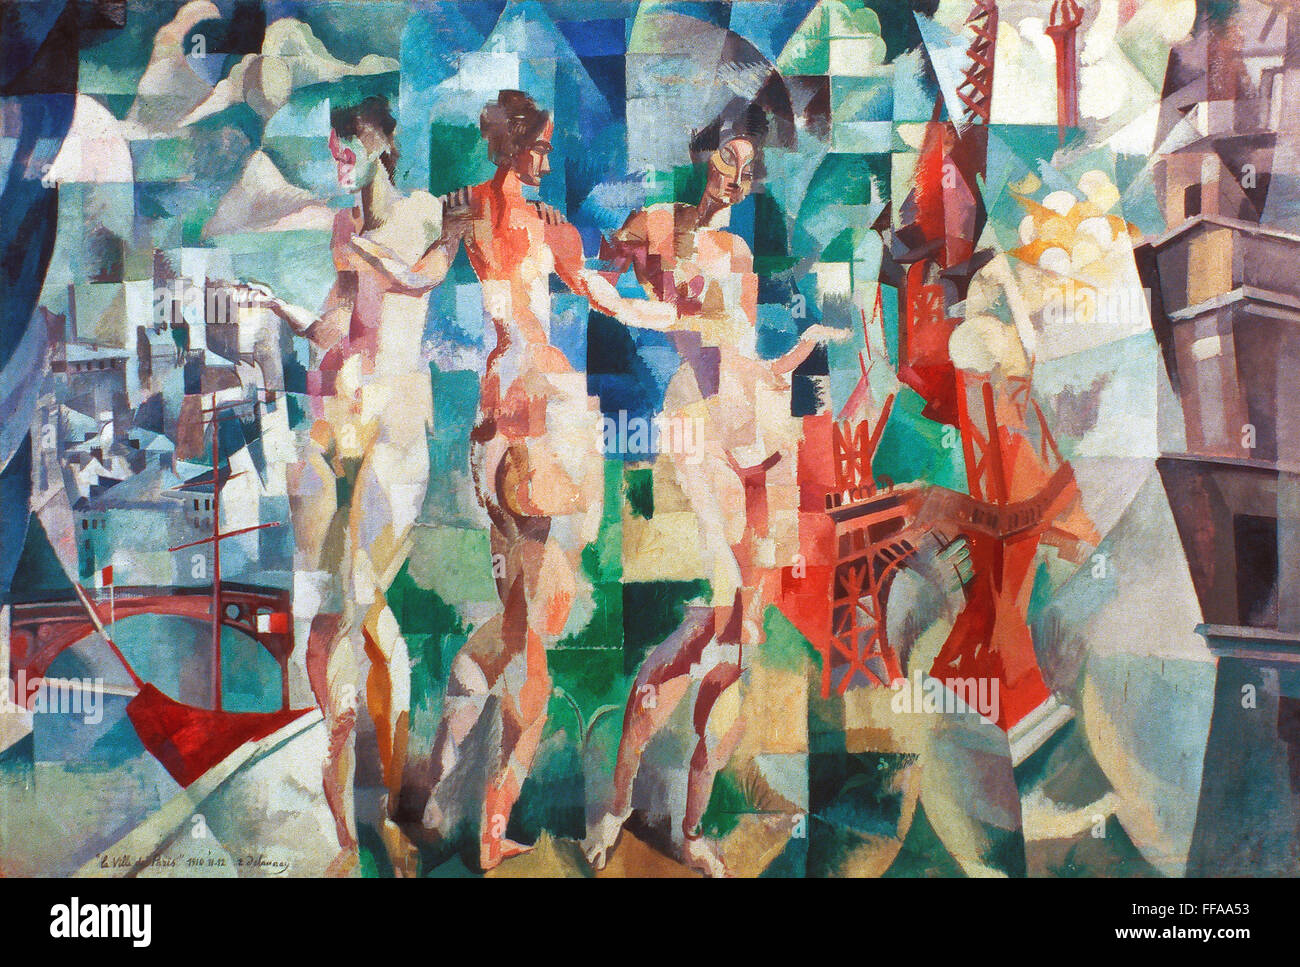 DELAUNAY: CITY OF PARIS. /nOil on canvas, 1910-1912. EDITORIAL USE ONLY. Stock Photo